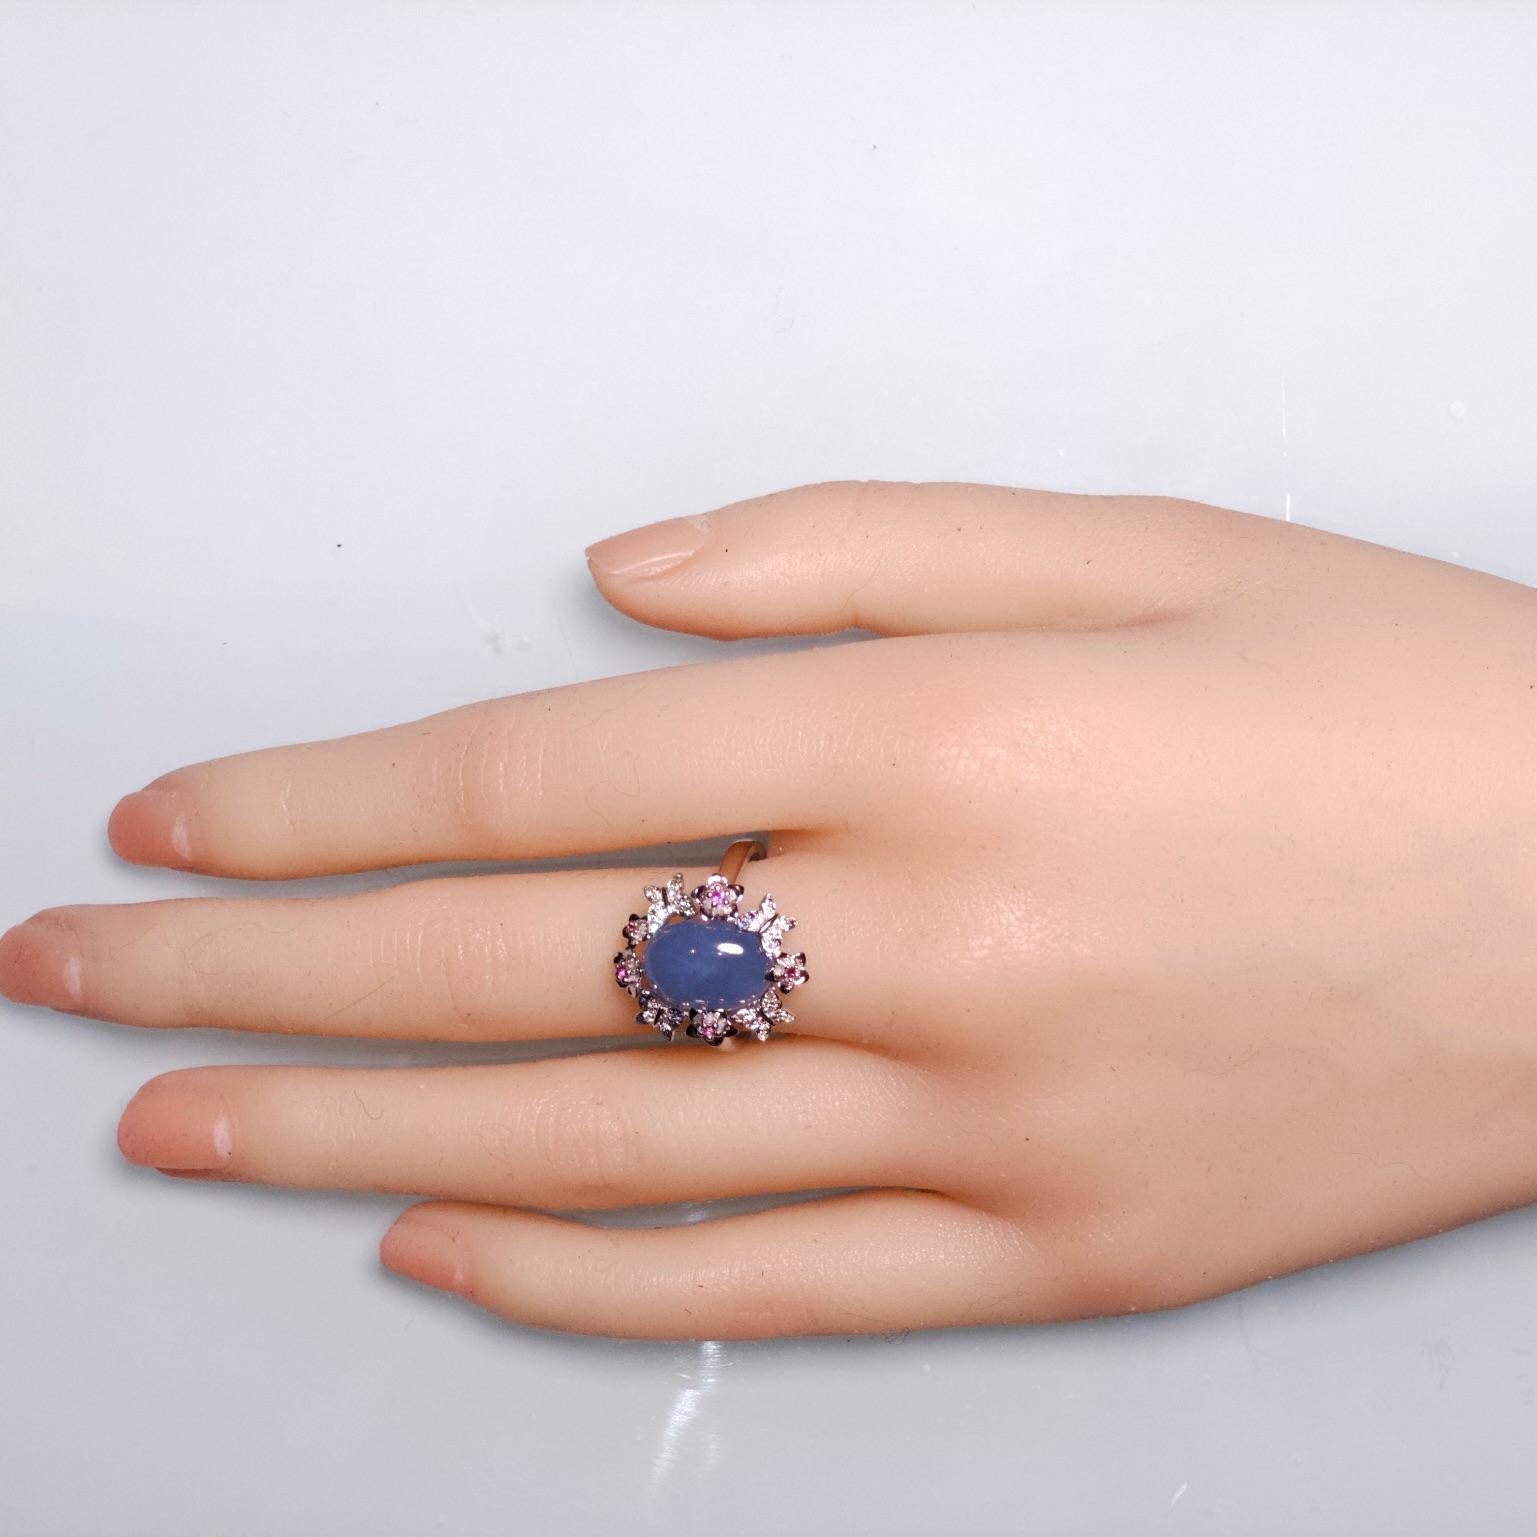 Cabochon Type A Natural Purplish Blue Jadeite Jade and Diamond Ring in 18k White Gold